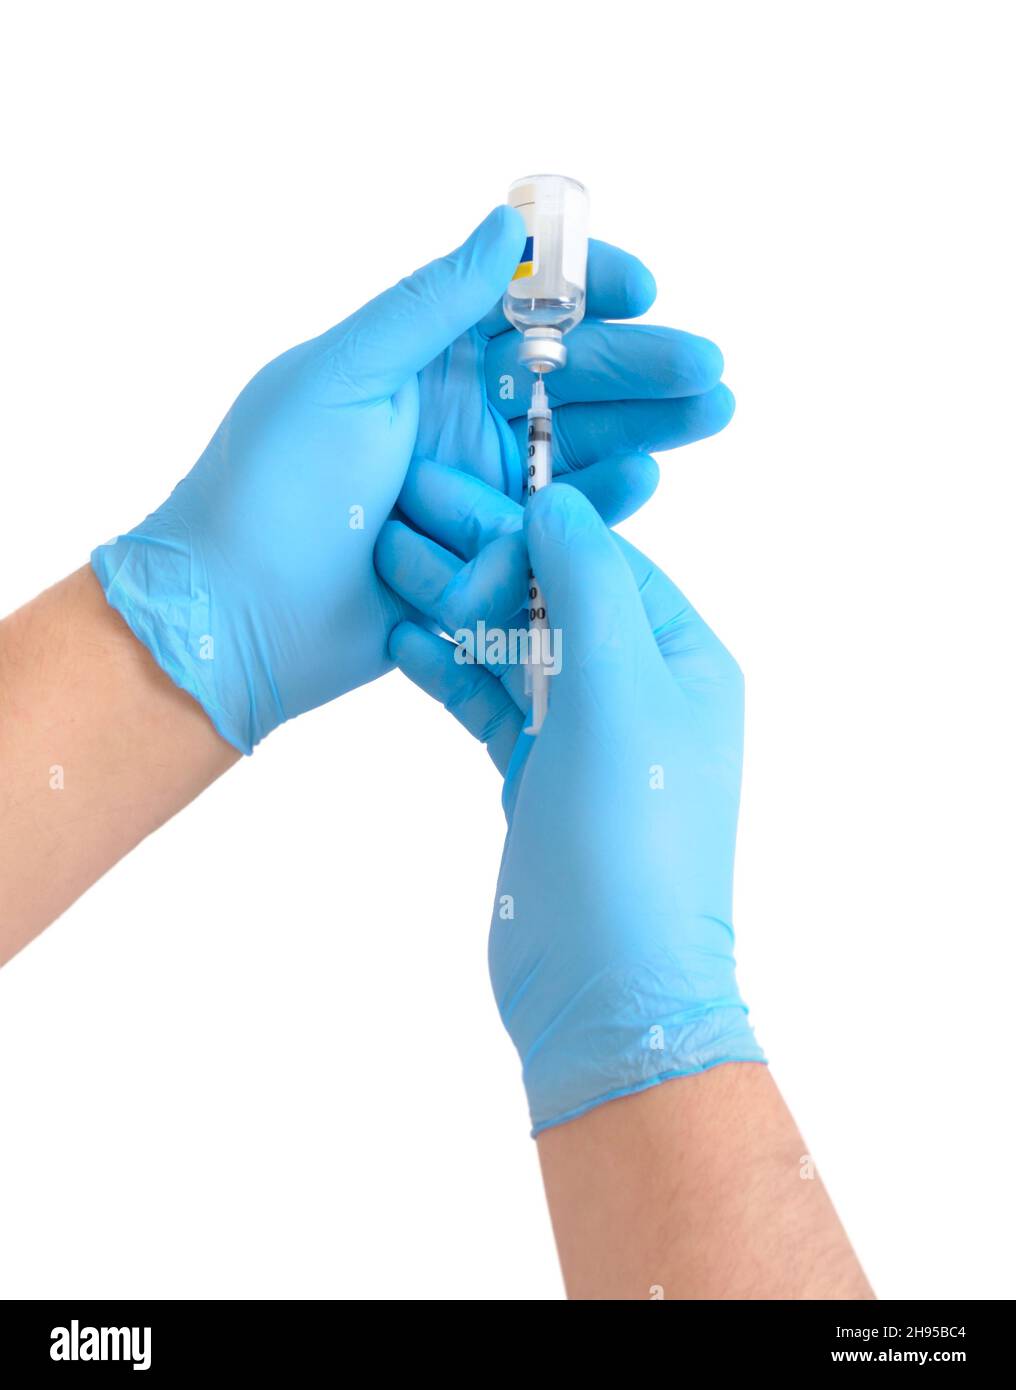 Taking drugs or vaccines into a syringe. Isolated on white background. Stock Photo